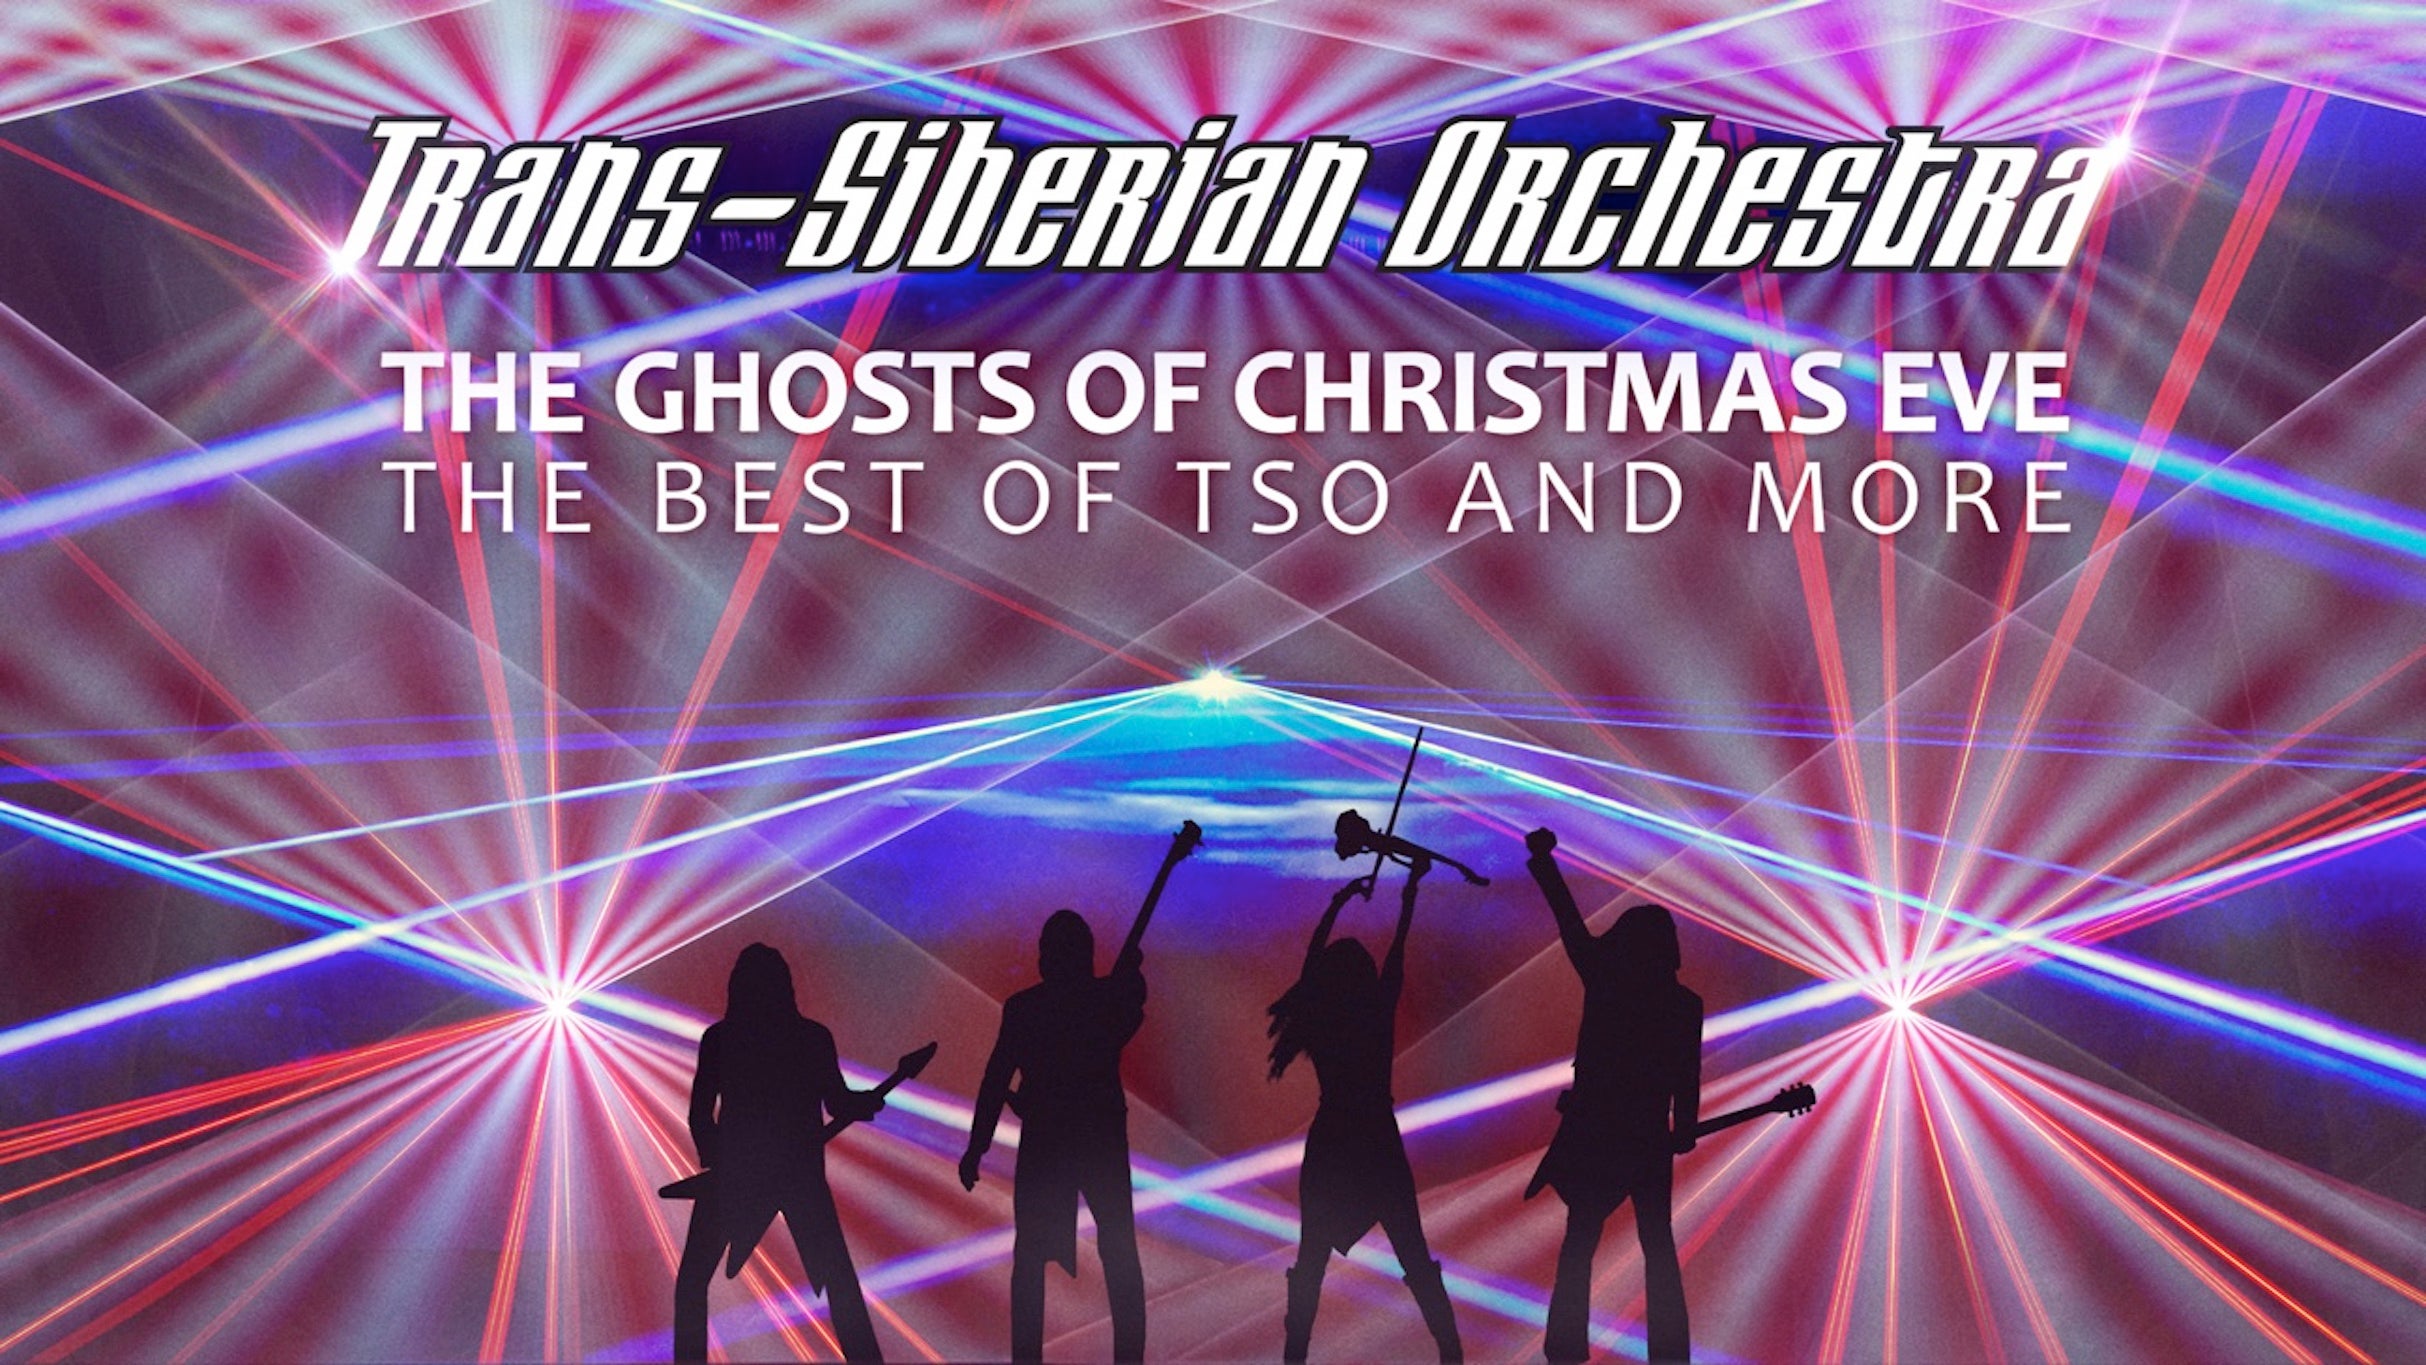 Trans-Siberian Orchestra-The Ghosts Of Christmas Eve free presale password for early tickets in Orlando